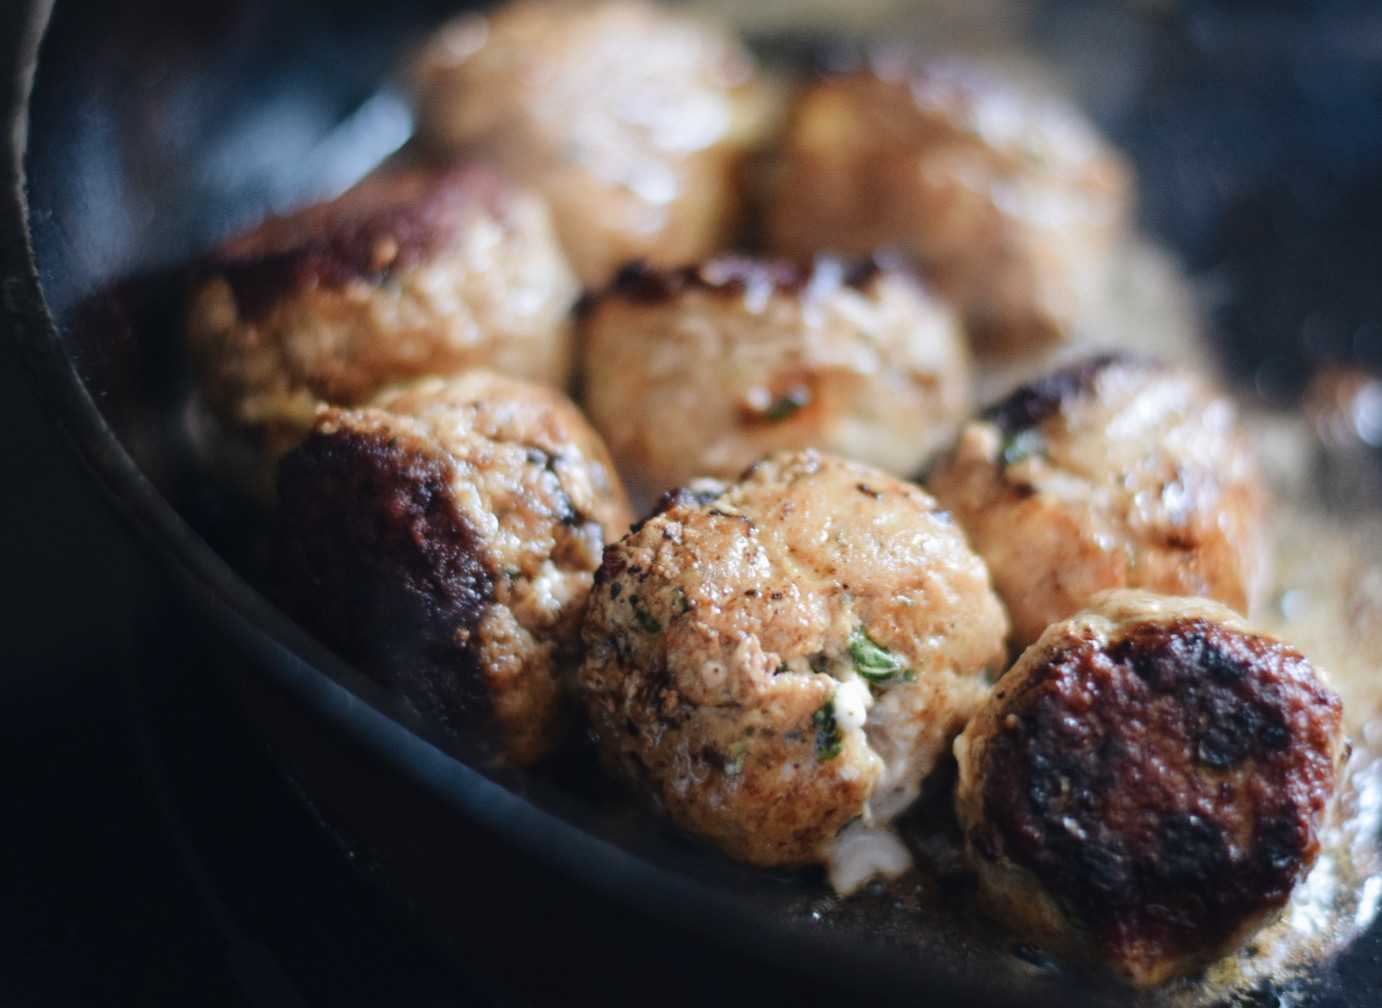 meatballs cooking in an iron skillet